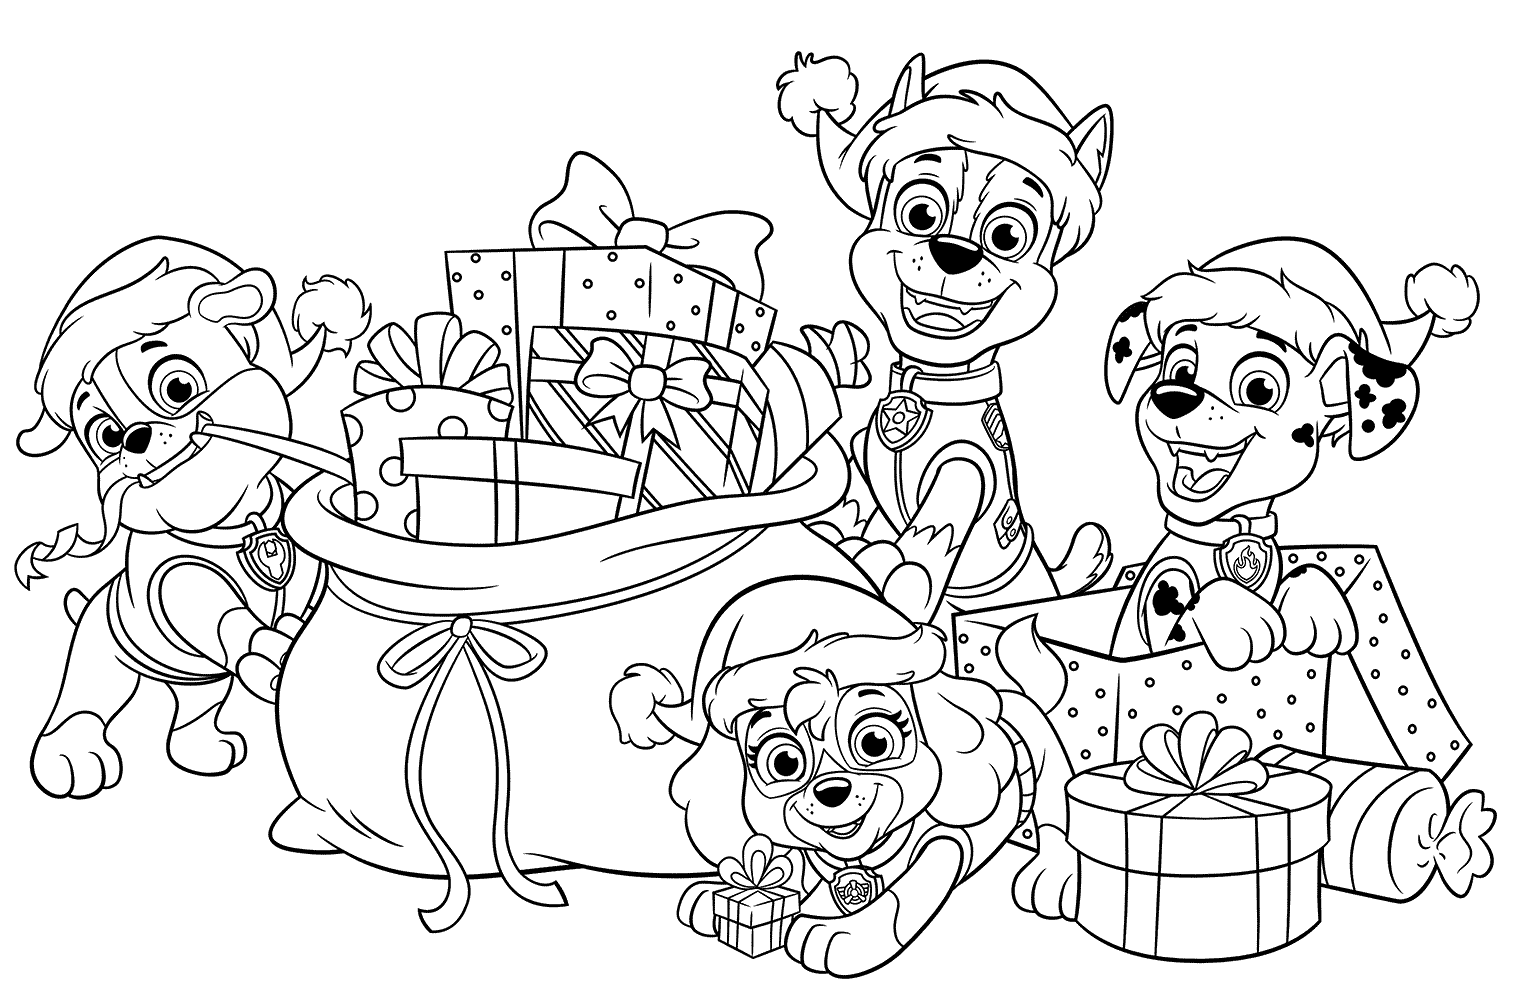 PAW Patrol Christmas Gifts Page Coloring Page